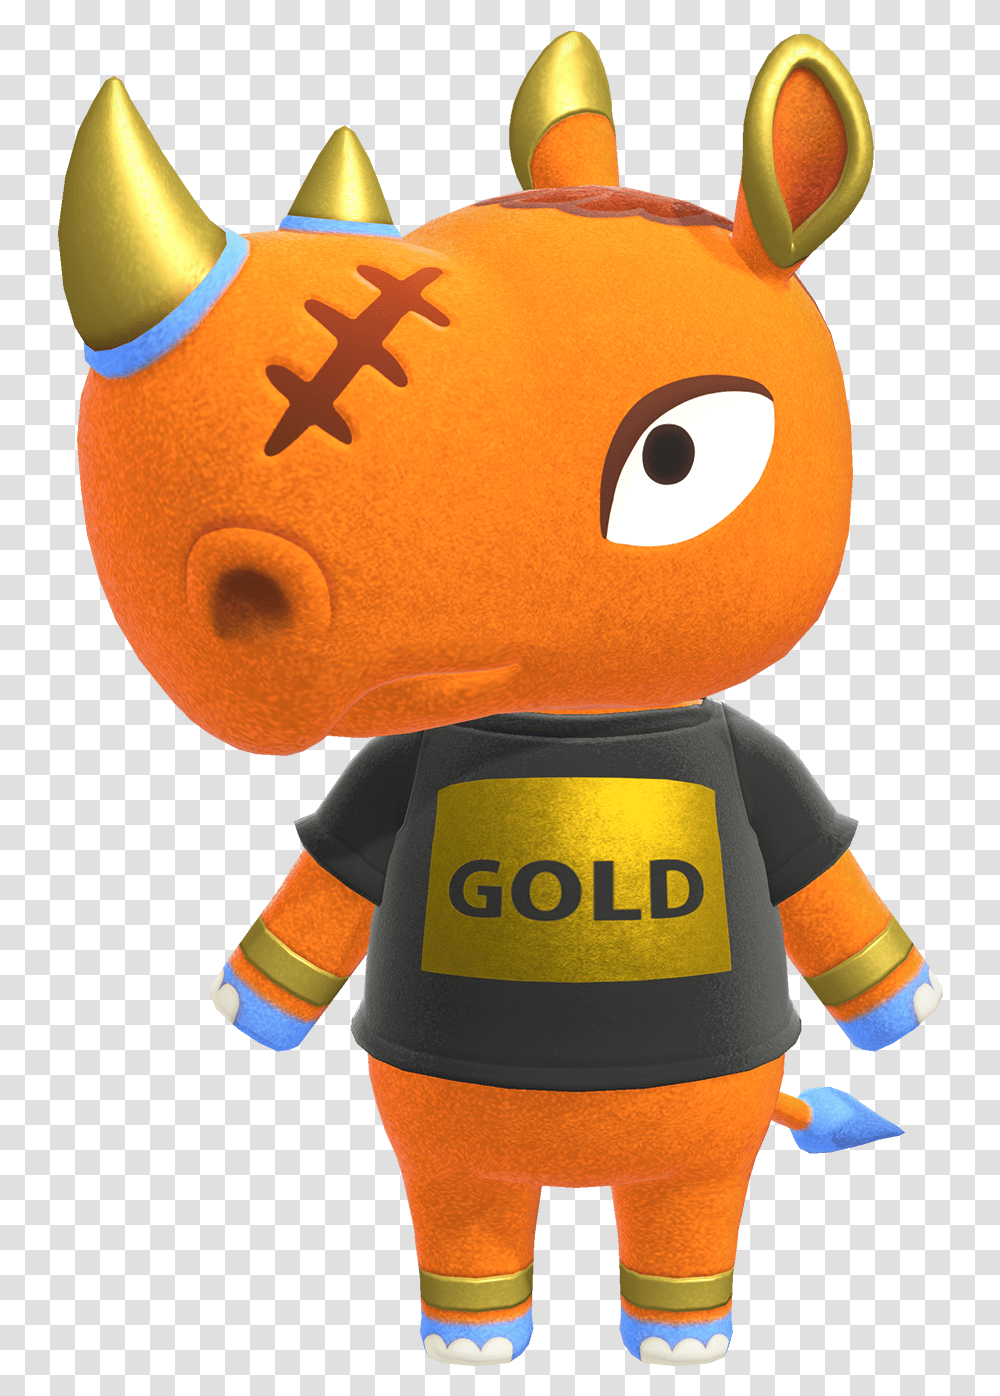 Spike Spike From Animal Crossing, Toy, Clothing, Apparel, Fireman Transparent Png